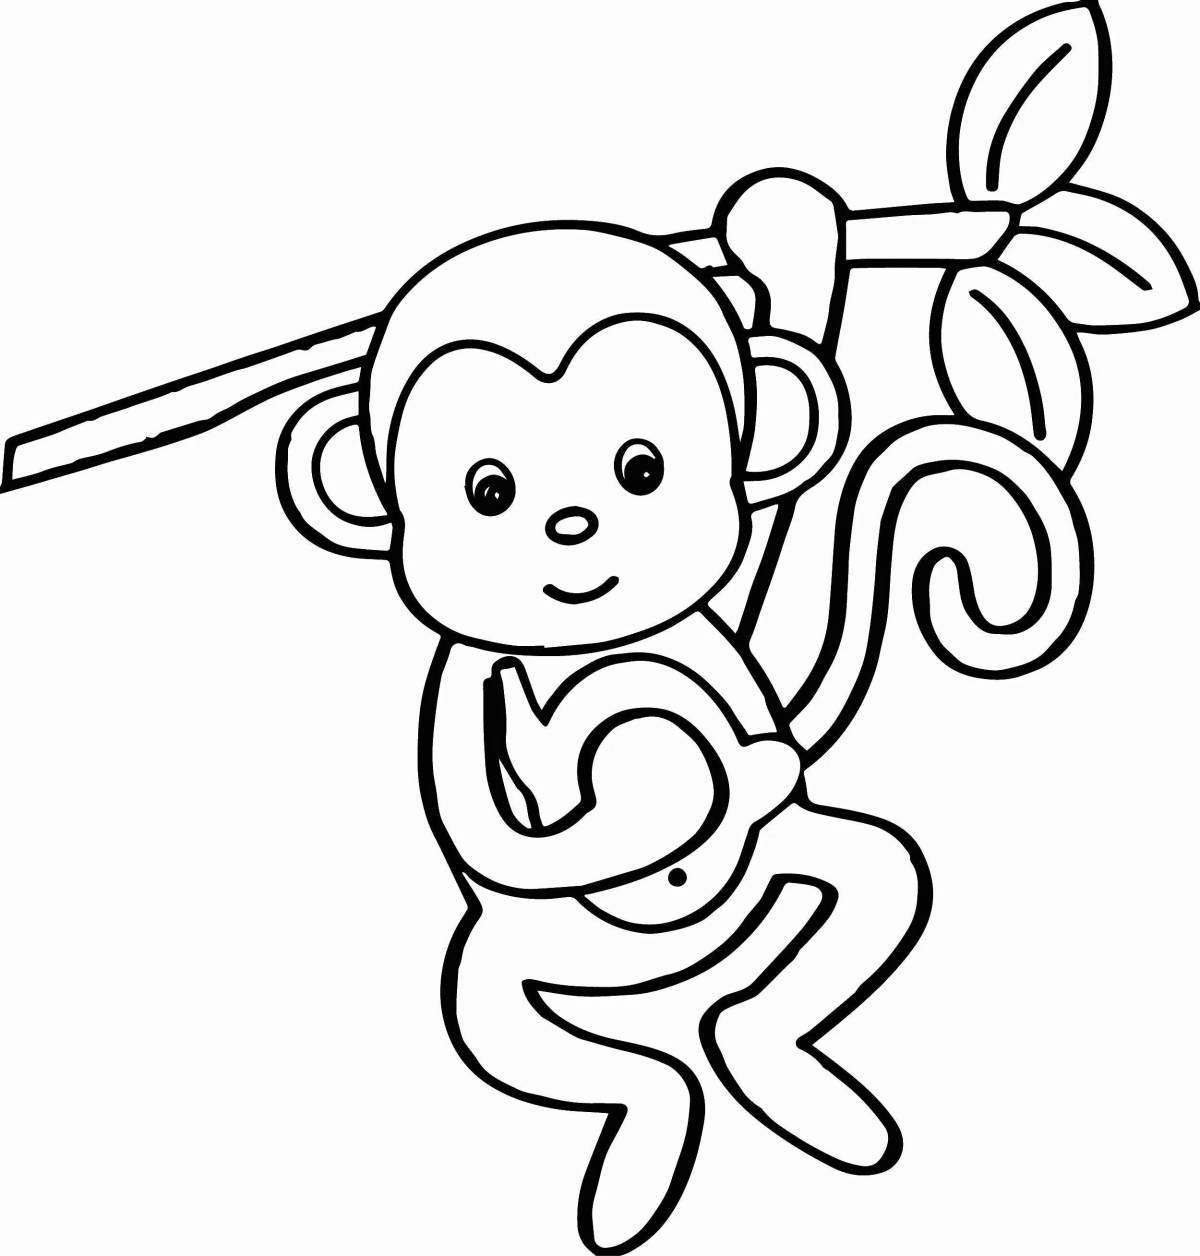 Coloring funny monkey figurine